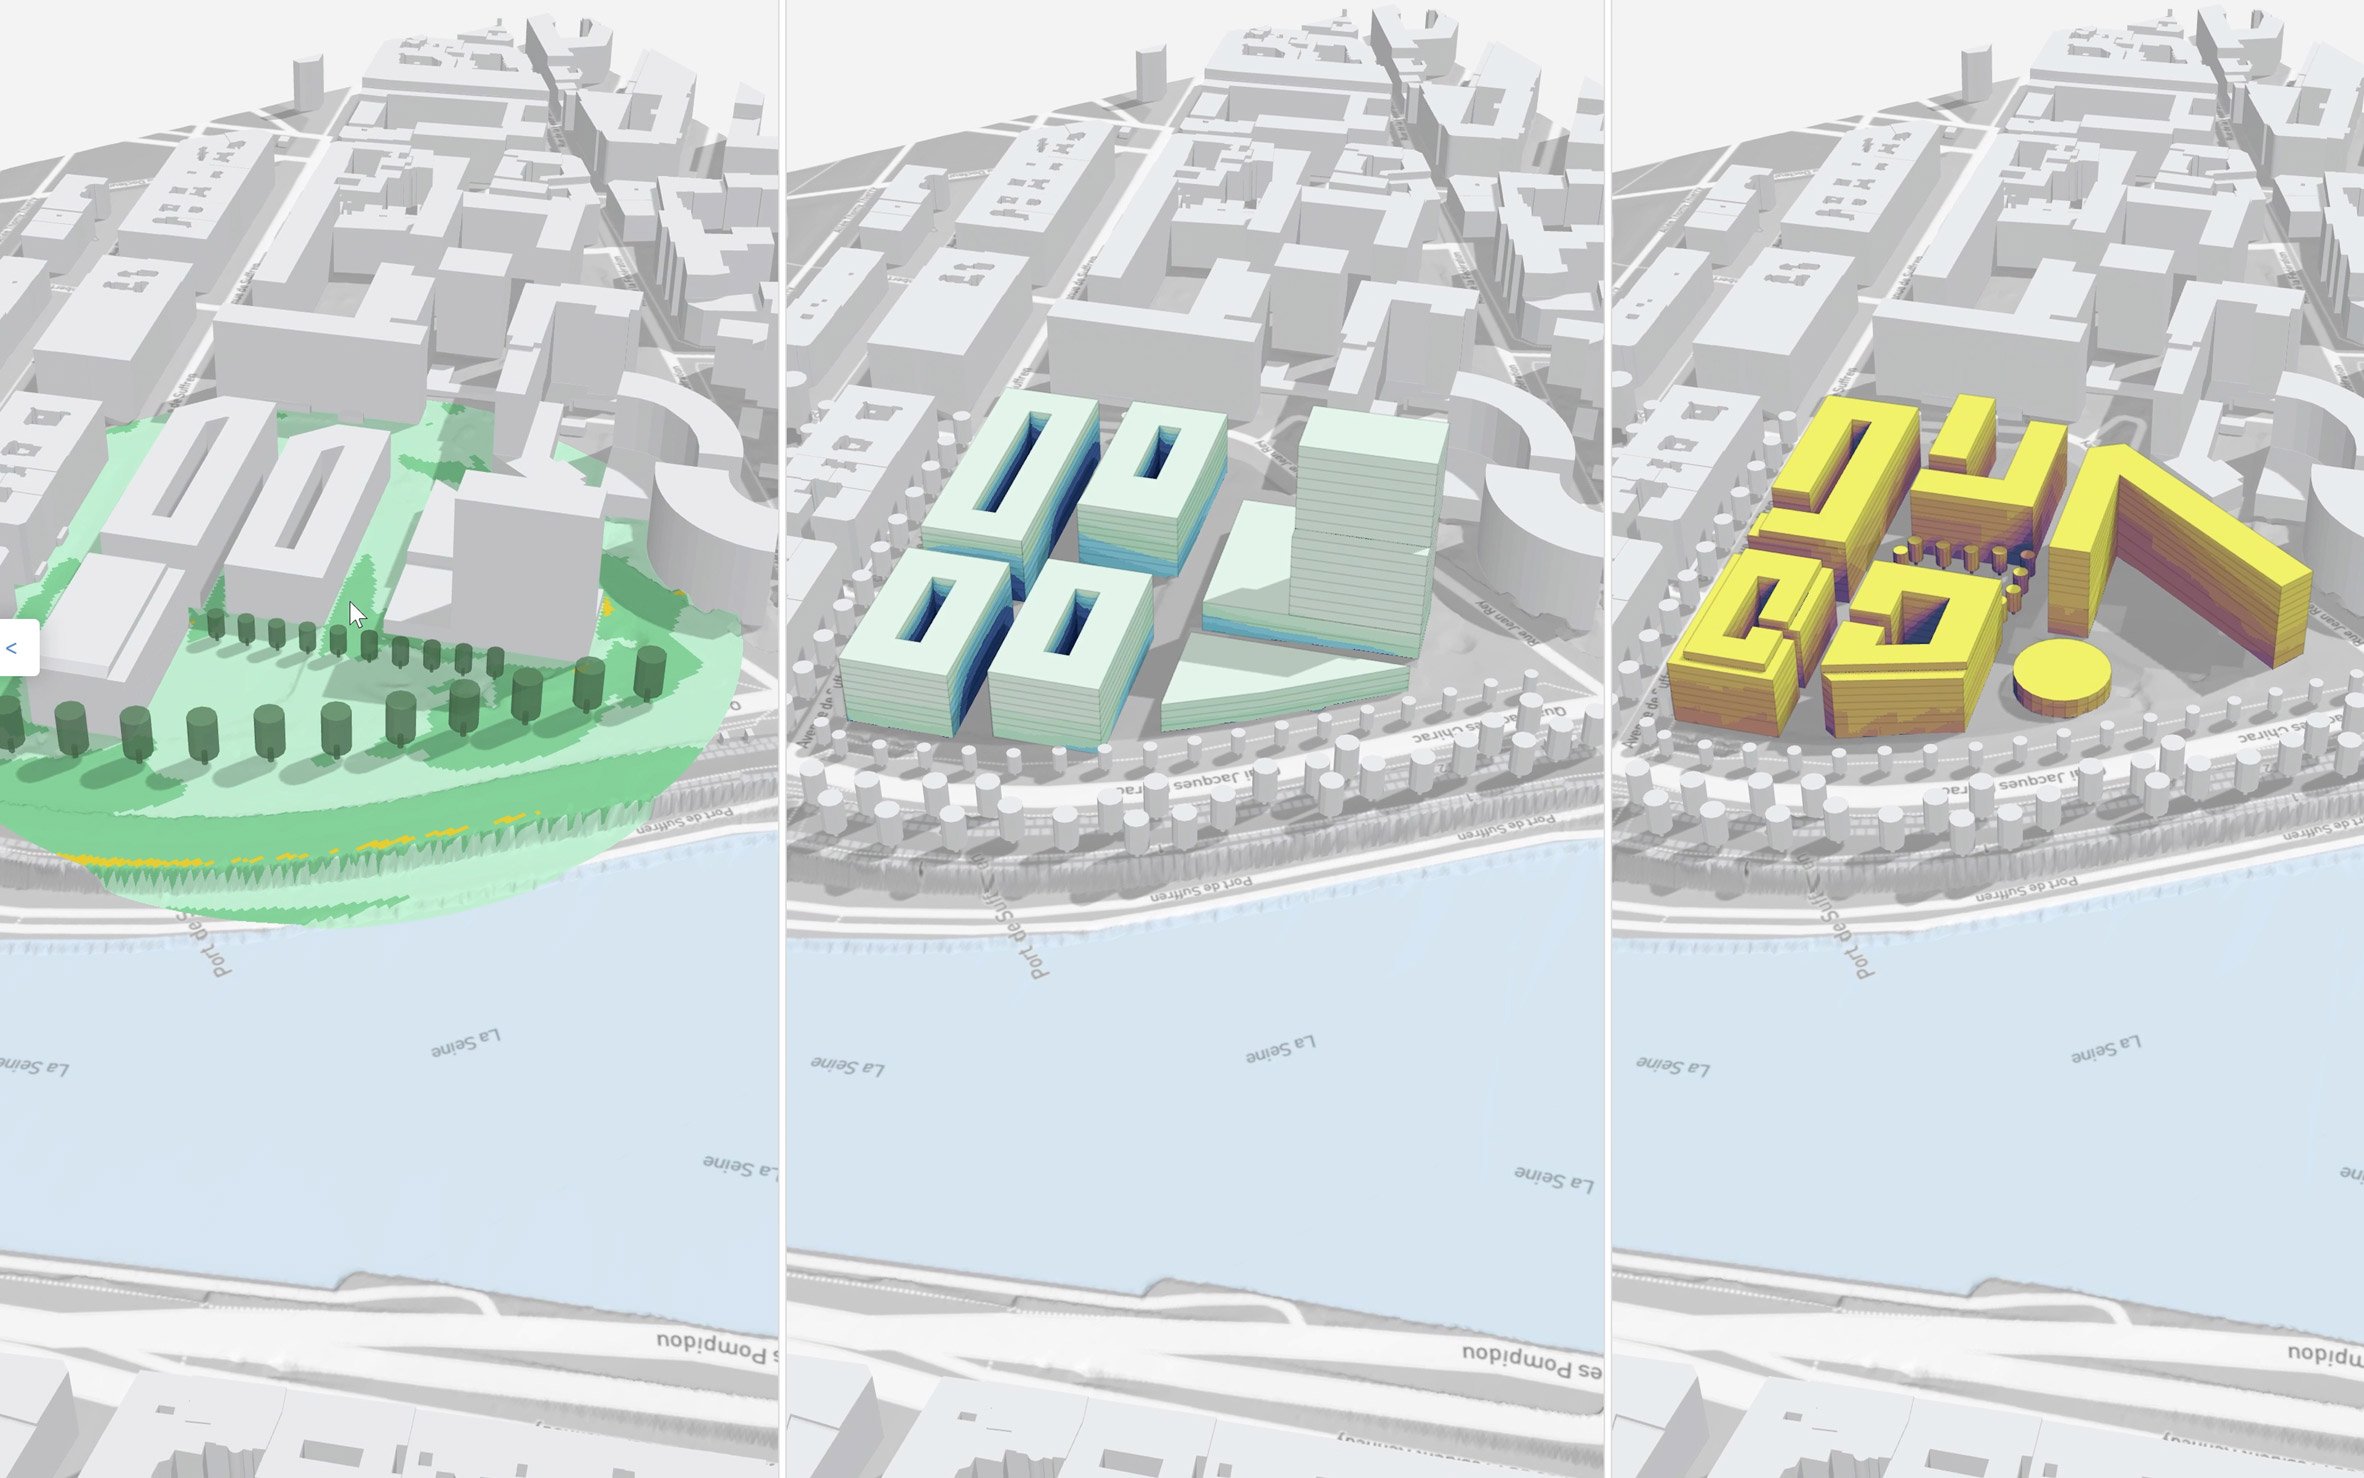 Screenshot of Autodesk's Forma software showing a comparison of three designs on the same site on the River Seine